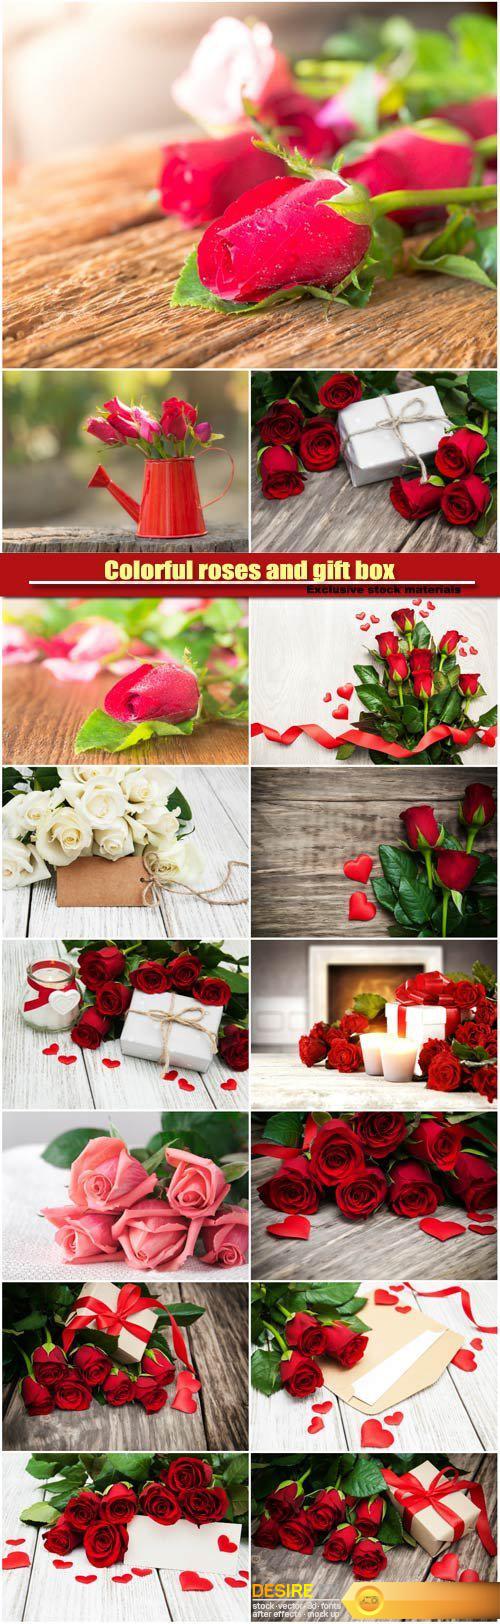 Colorful roses and gift box